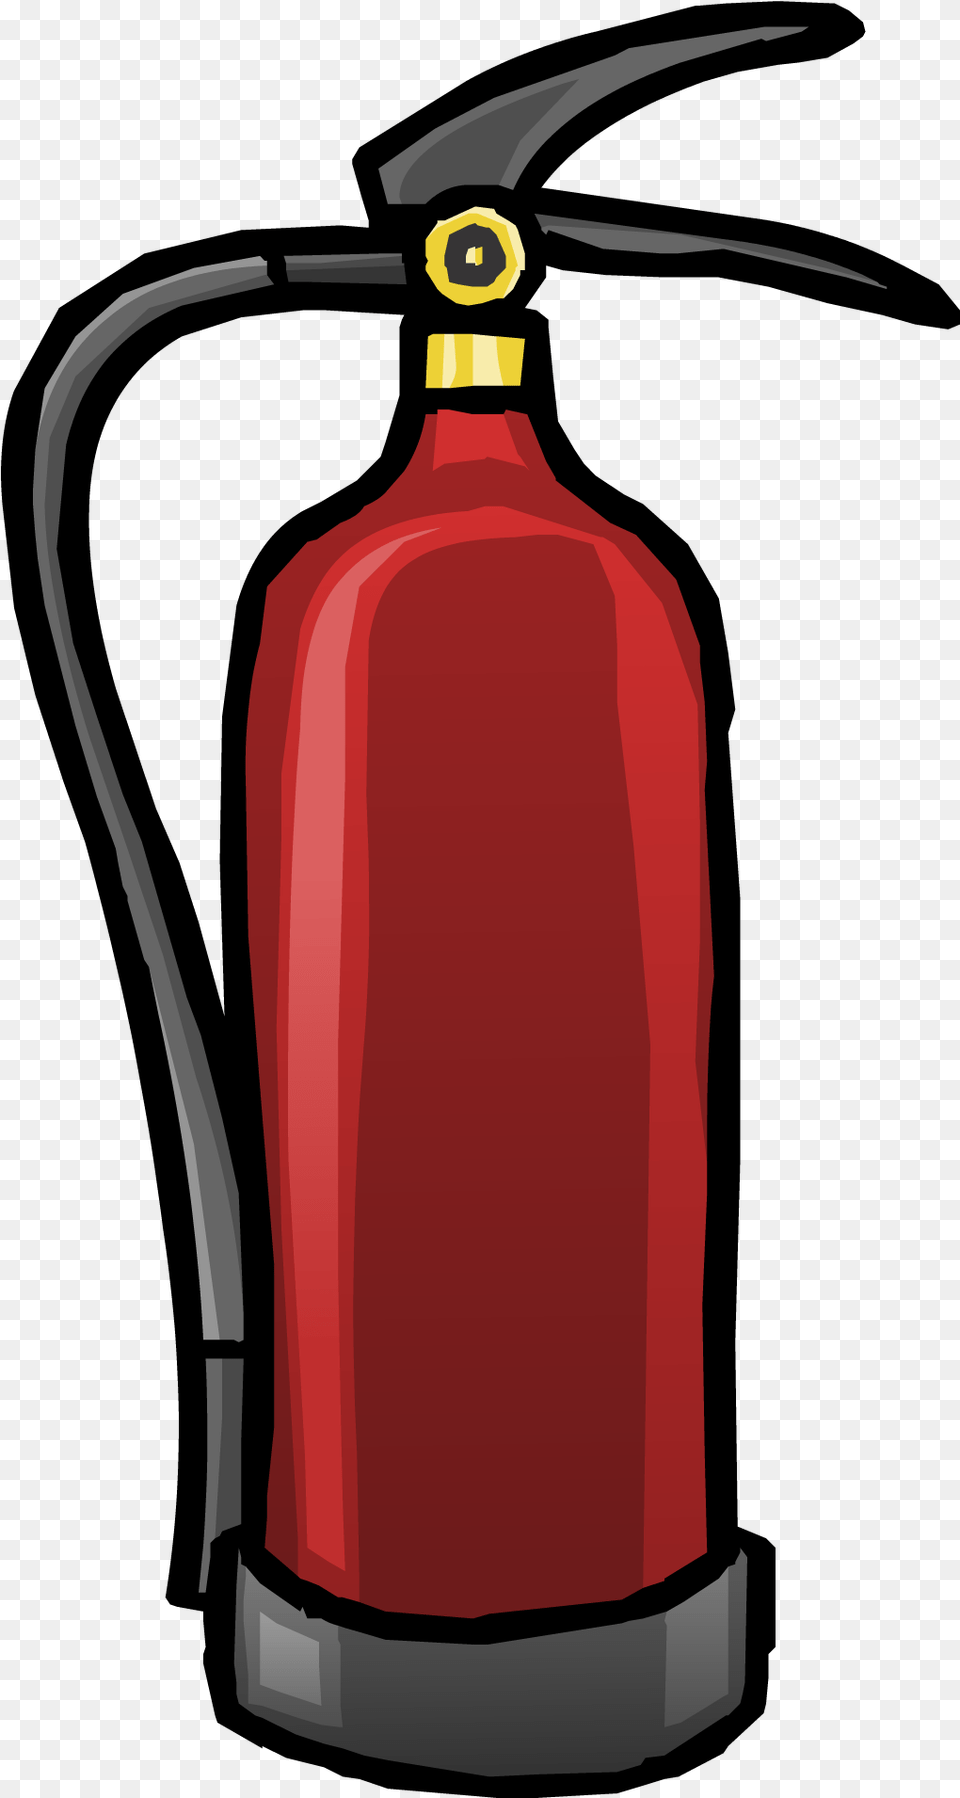 Extinguisher Fire Extinguisher Image Clipart Clip Art Transparent Background Fire Extinguisher, Cylinder Free Png